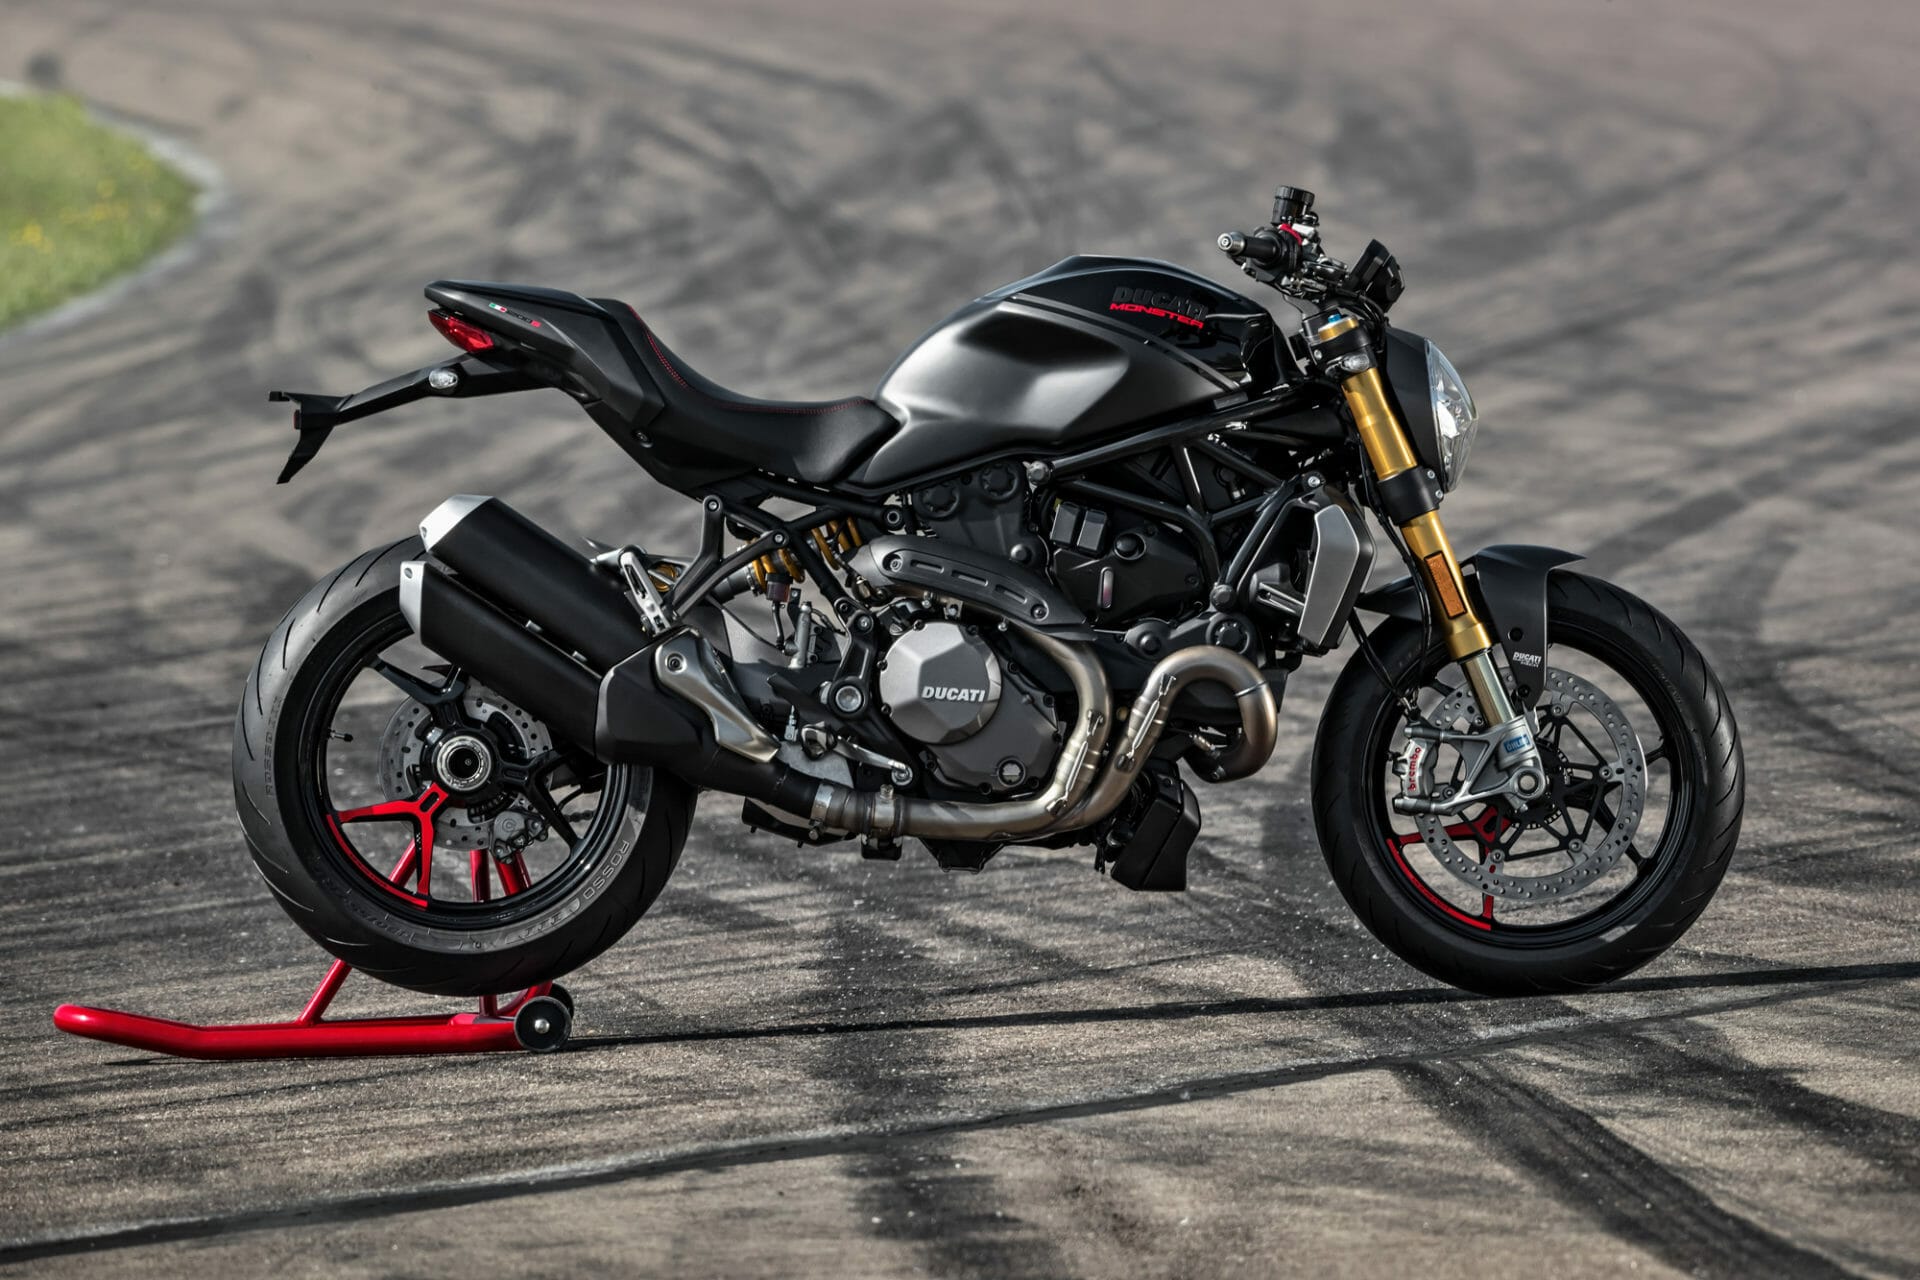 Recall Ducati Monster 821 / 1200
- also in the MOTORCYCLES.NEWS APP